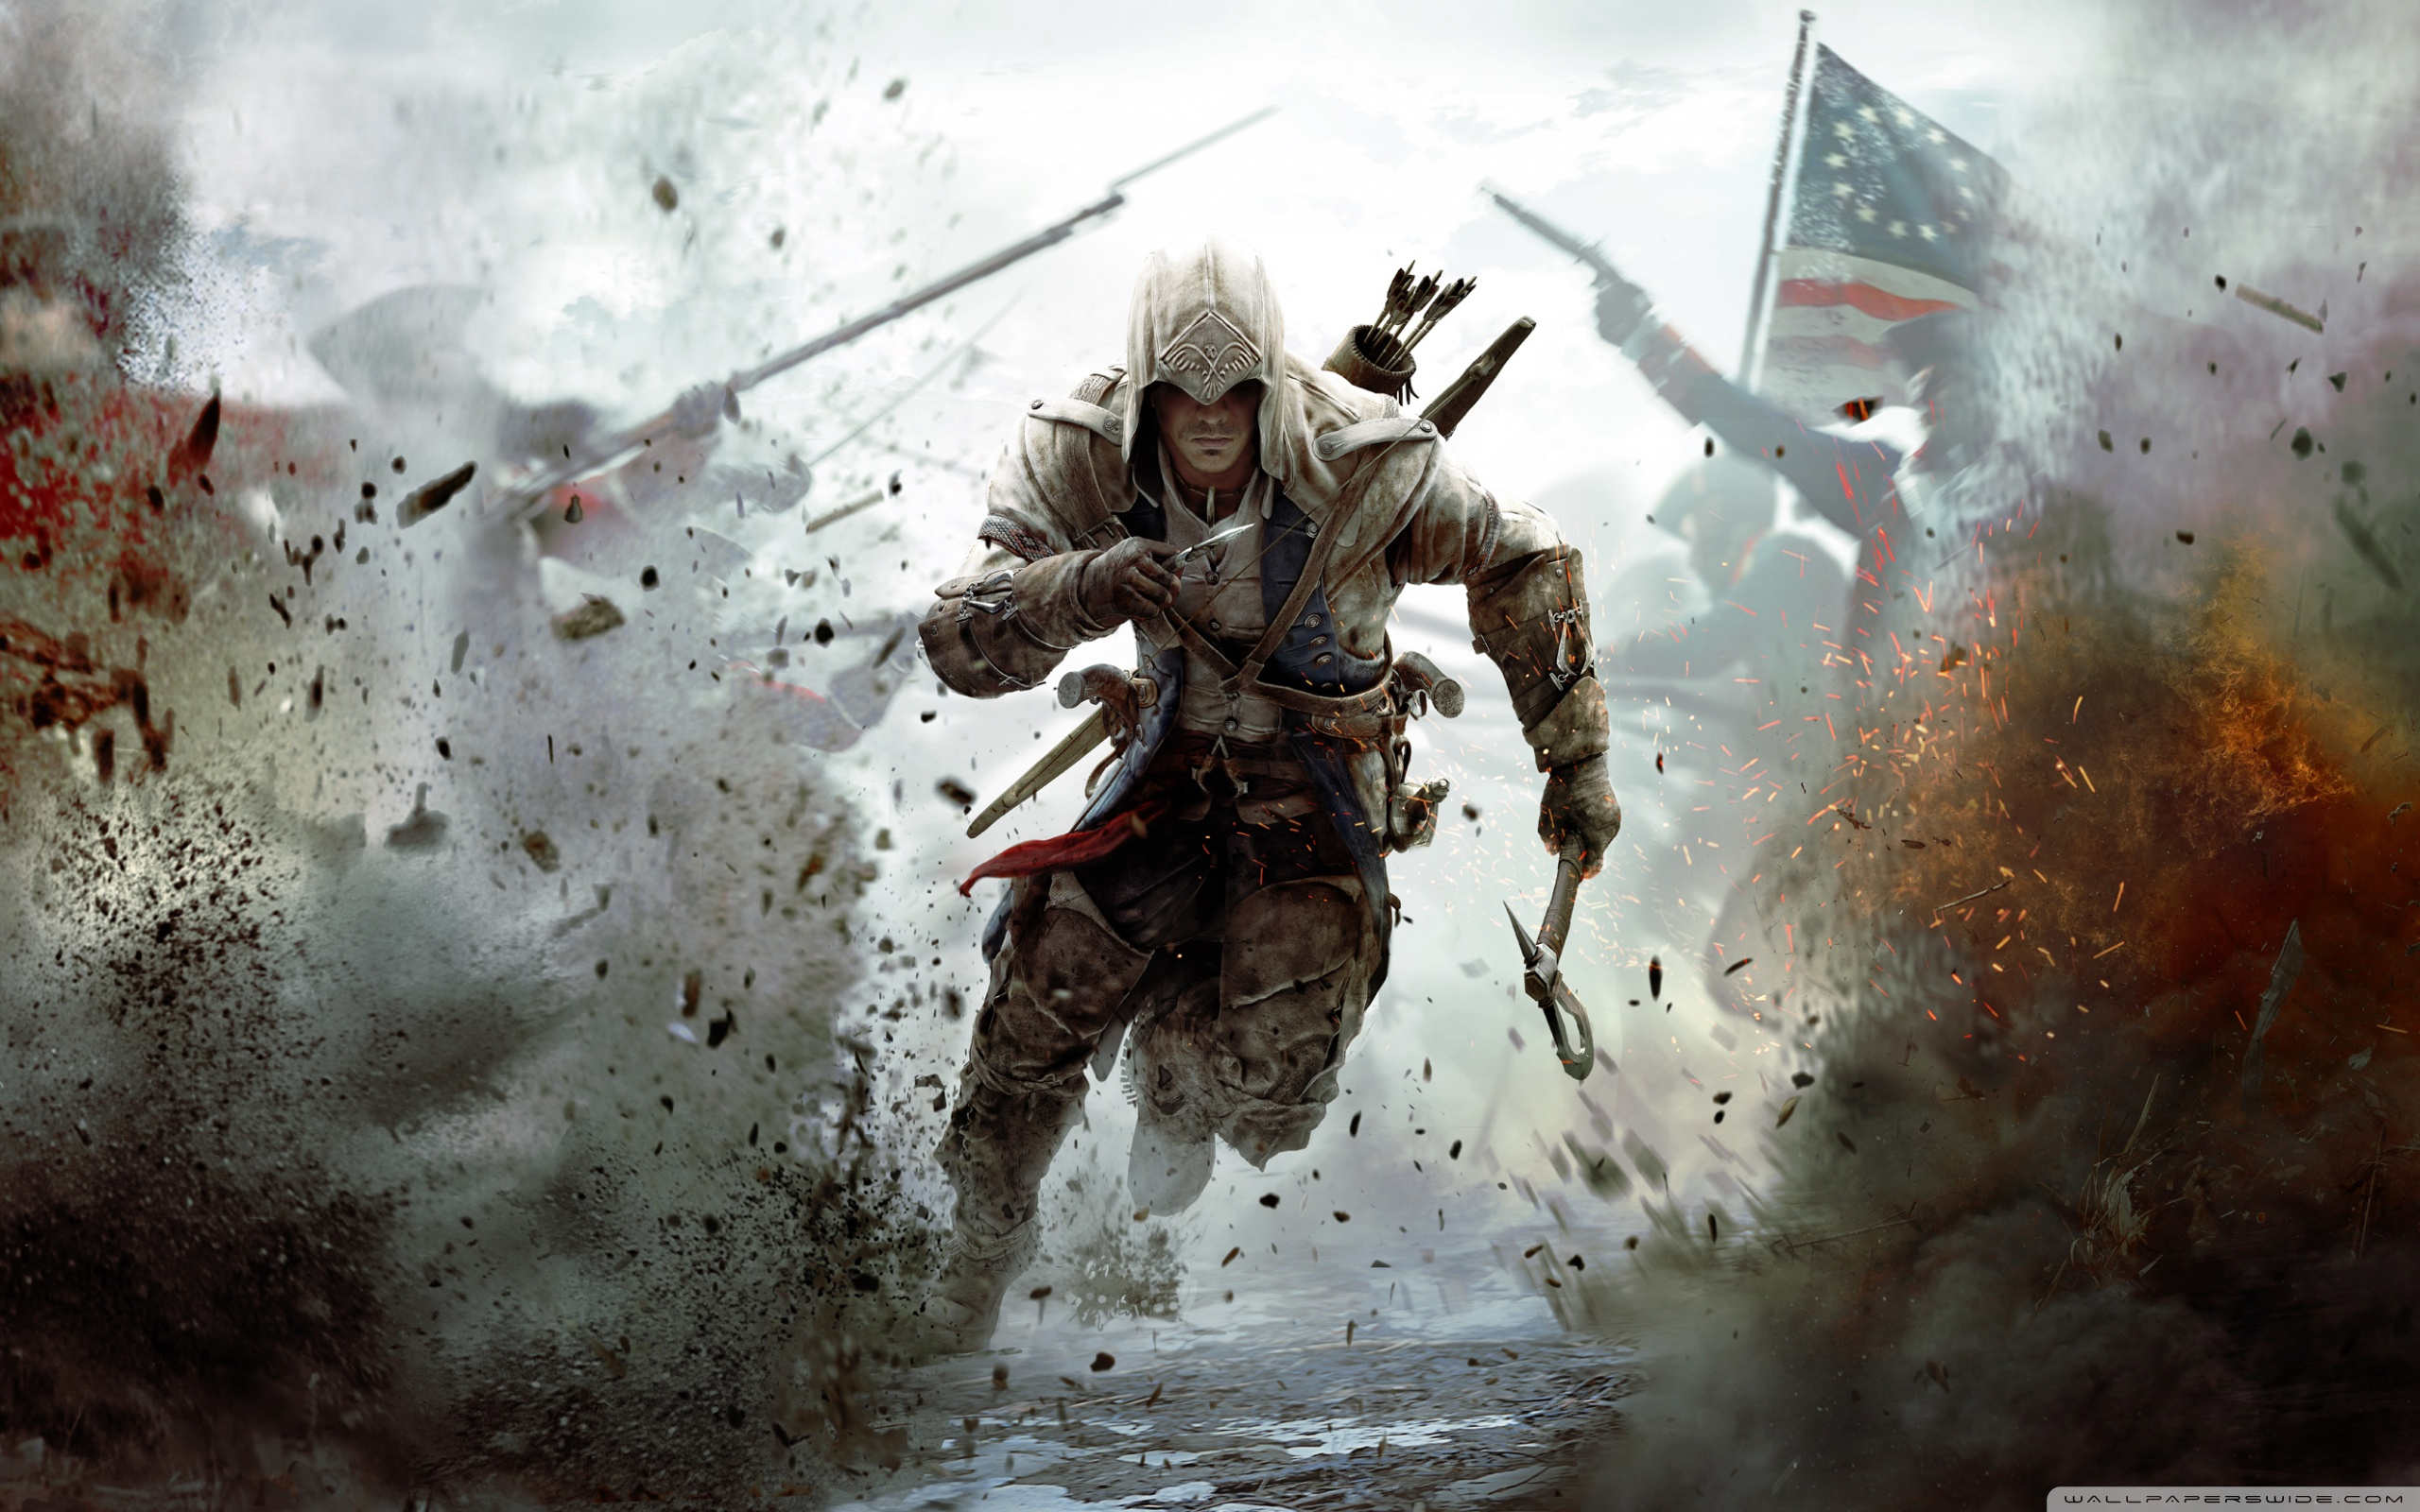 10 Top Assassin Creed Hd Wallpaper FULL HD 1080p For PC Background